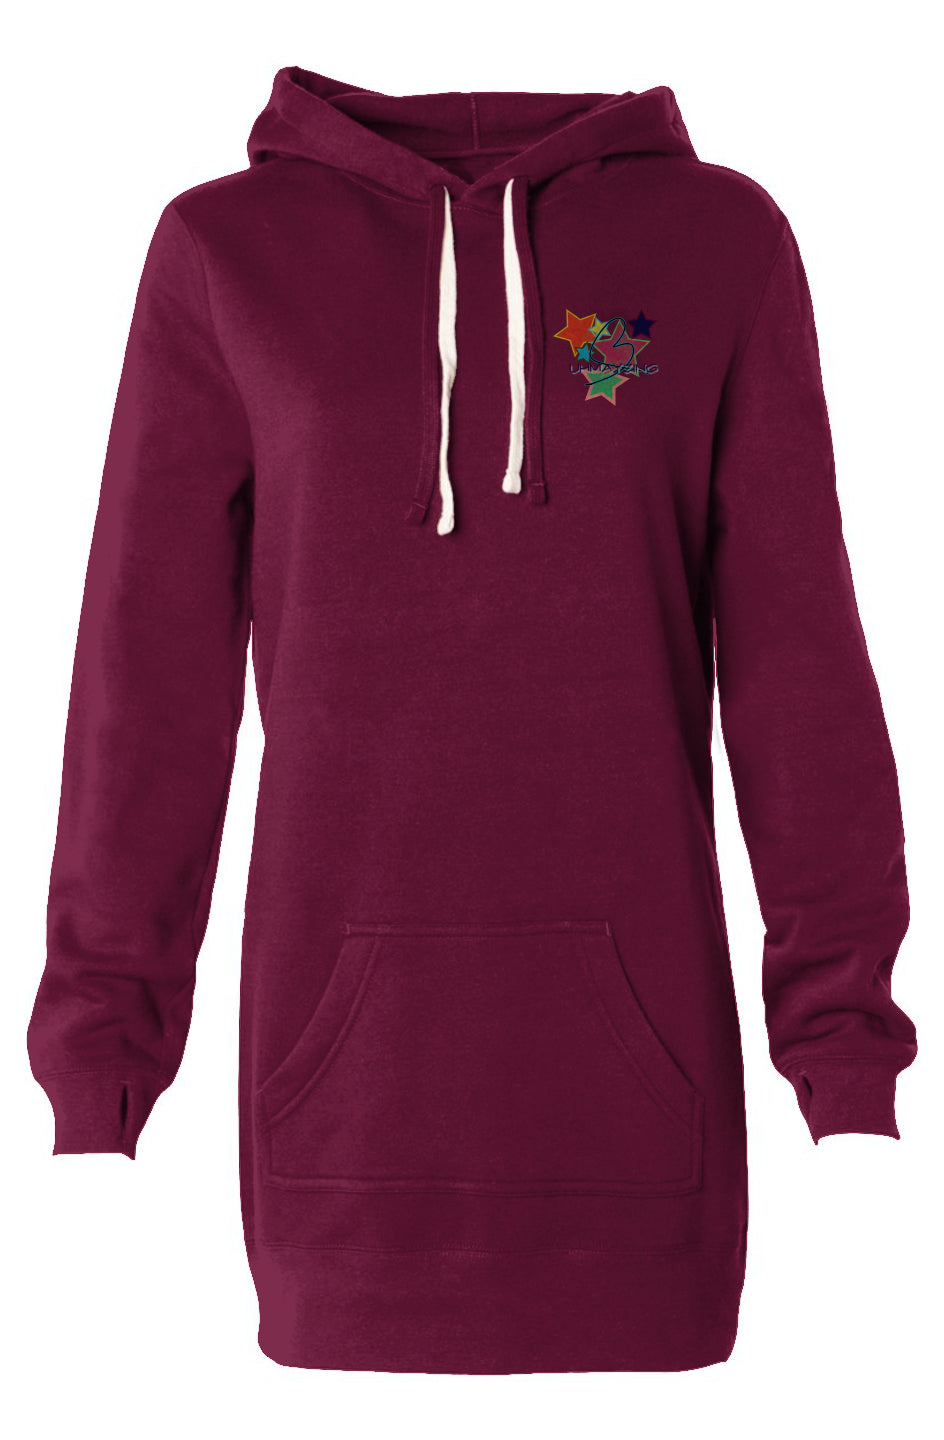 "  This Women's Maroon Hooded Pullover Sweatshirt Dress is the perfect addition to any wardrobe. It features a classic maroon color, a hooded design, and a comfortable pullover fit. The dress is made from a soft and lightweight fabric that is perfect for any season. It is perfect for layering over jeans, leggings, or skirts for a stylish and cozy look. This dress is sure to become a staple in your wardrobe.